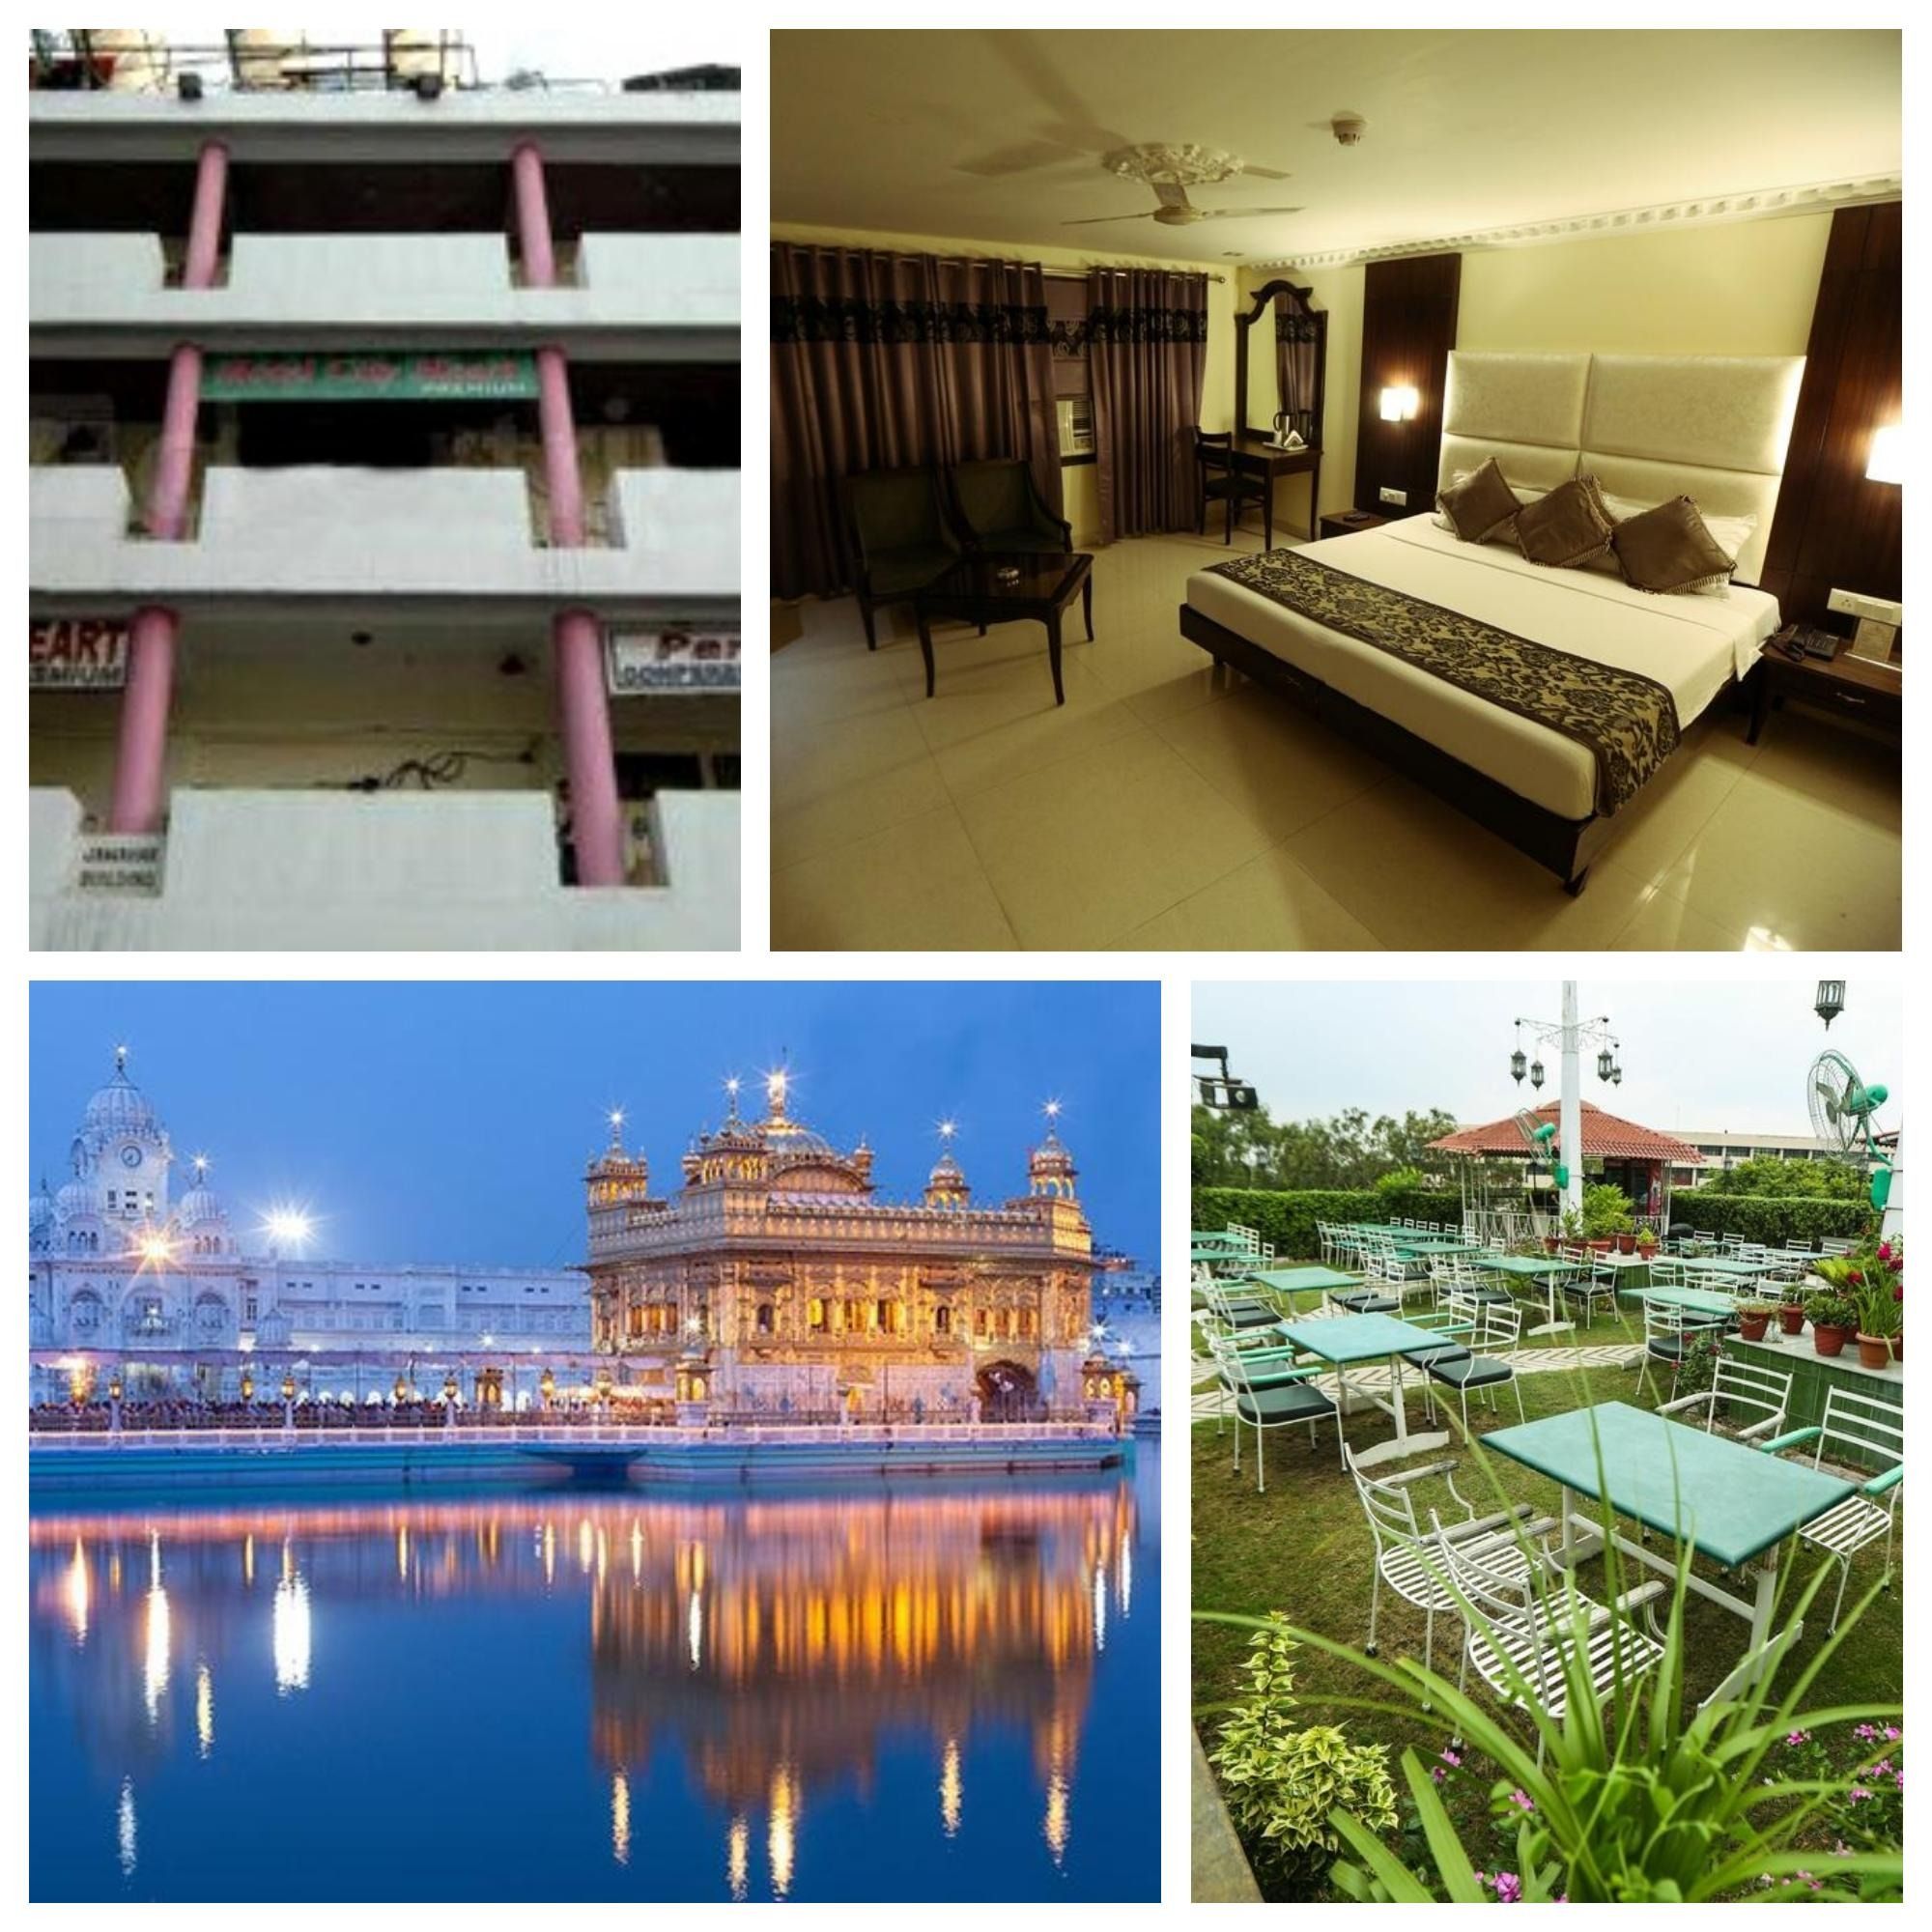 Hotel City Heart, Amritsar, is designed beautifully with a welcoming ...